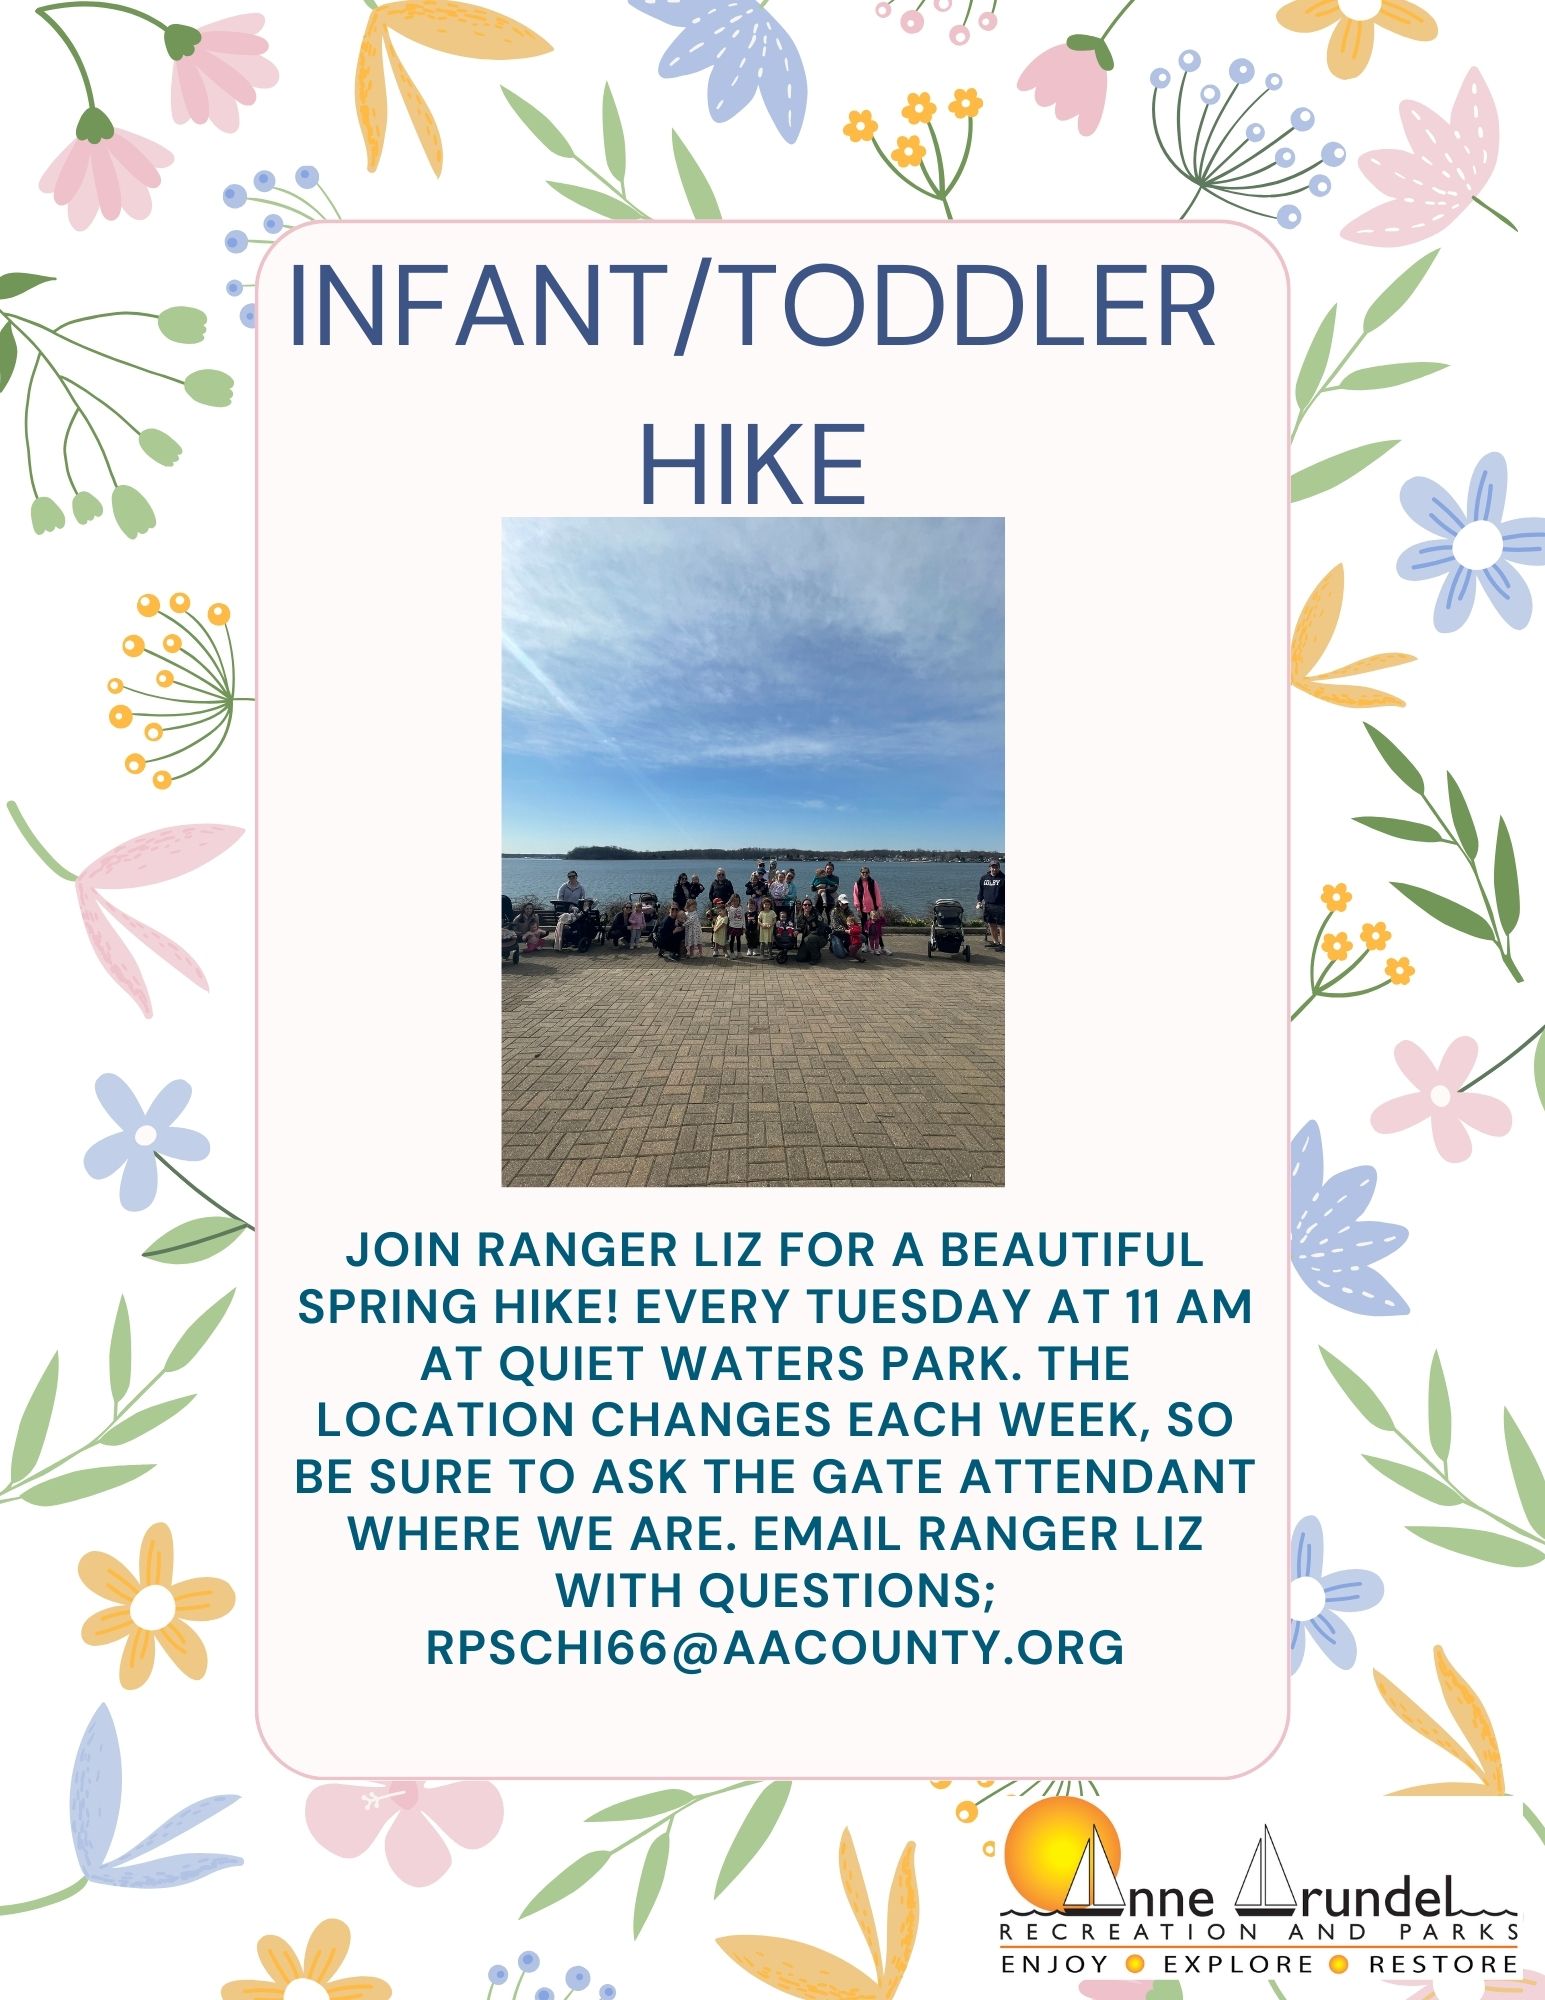 Infant-Toddler Hikes @ Location within Quiet Waters Park changes weekly